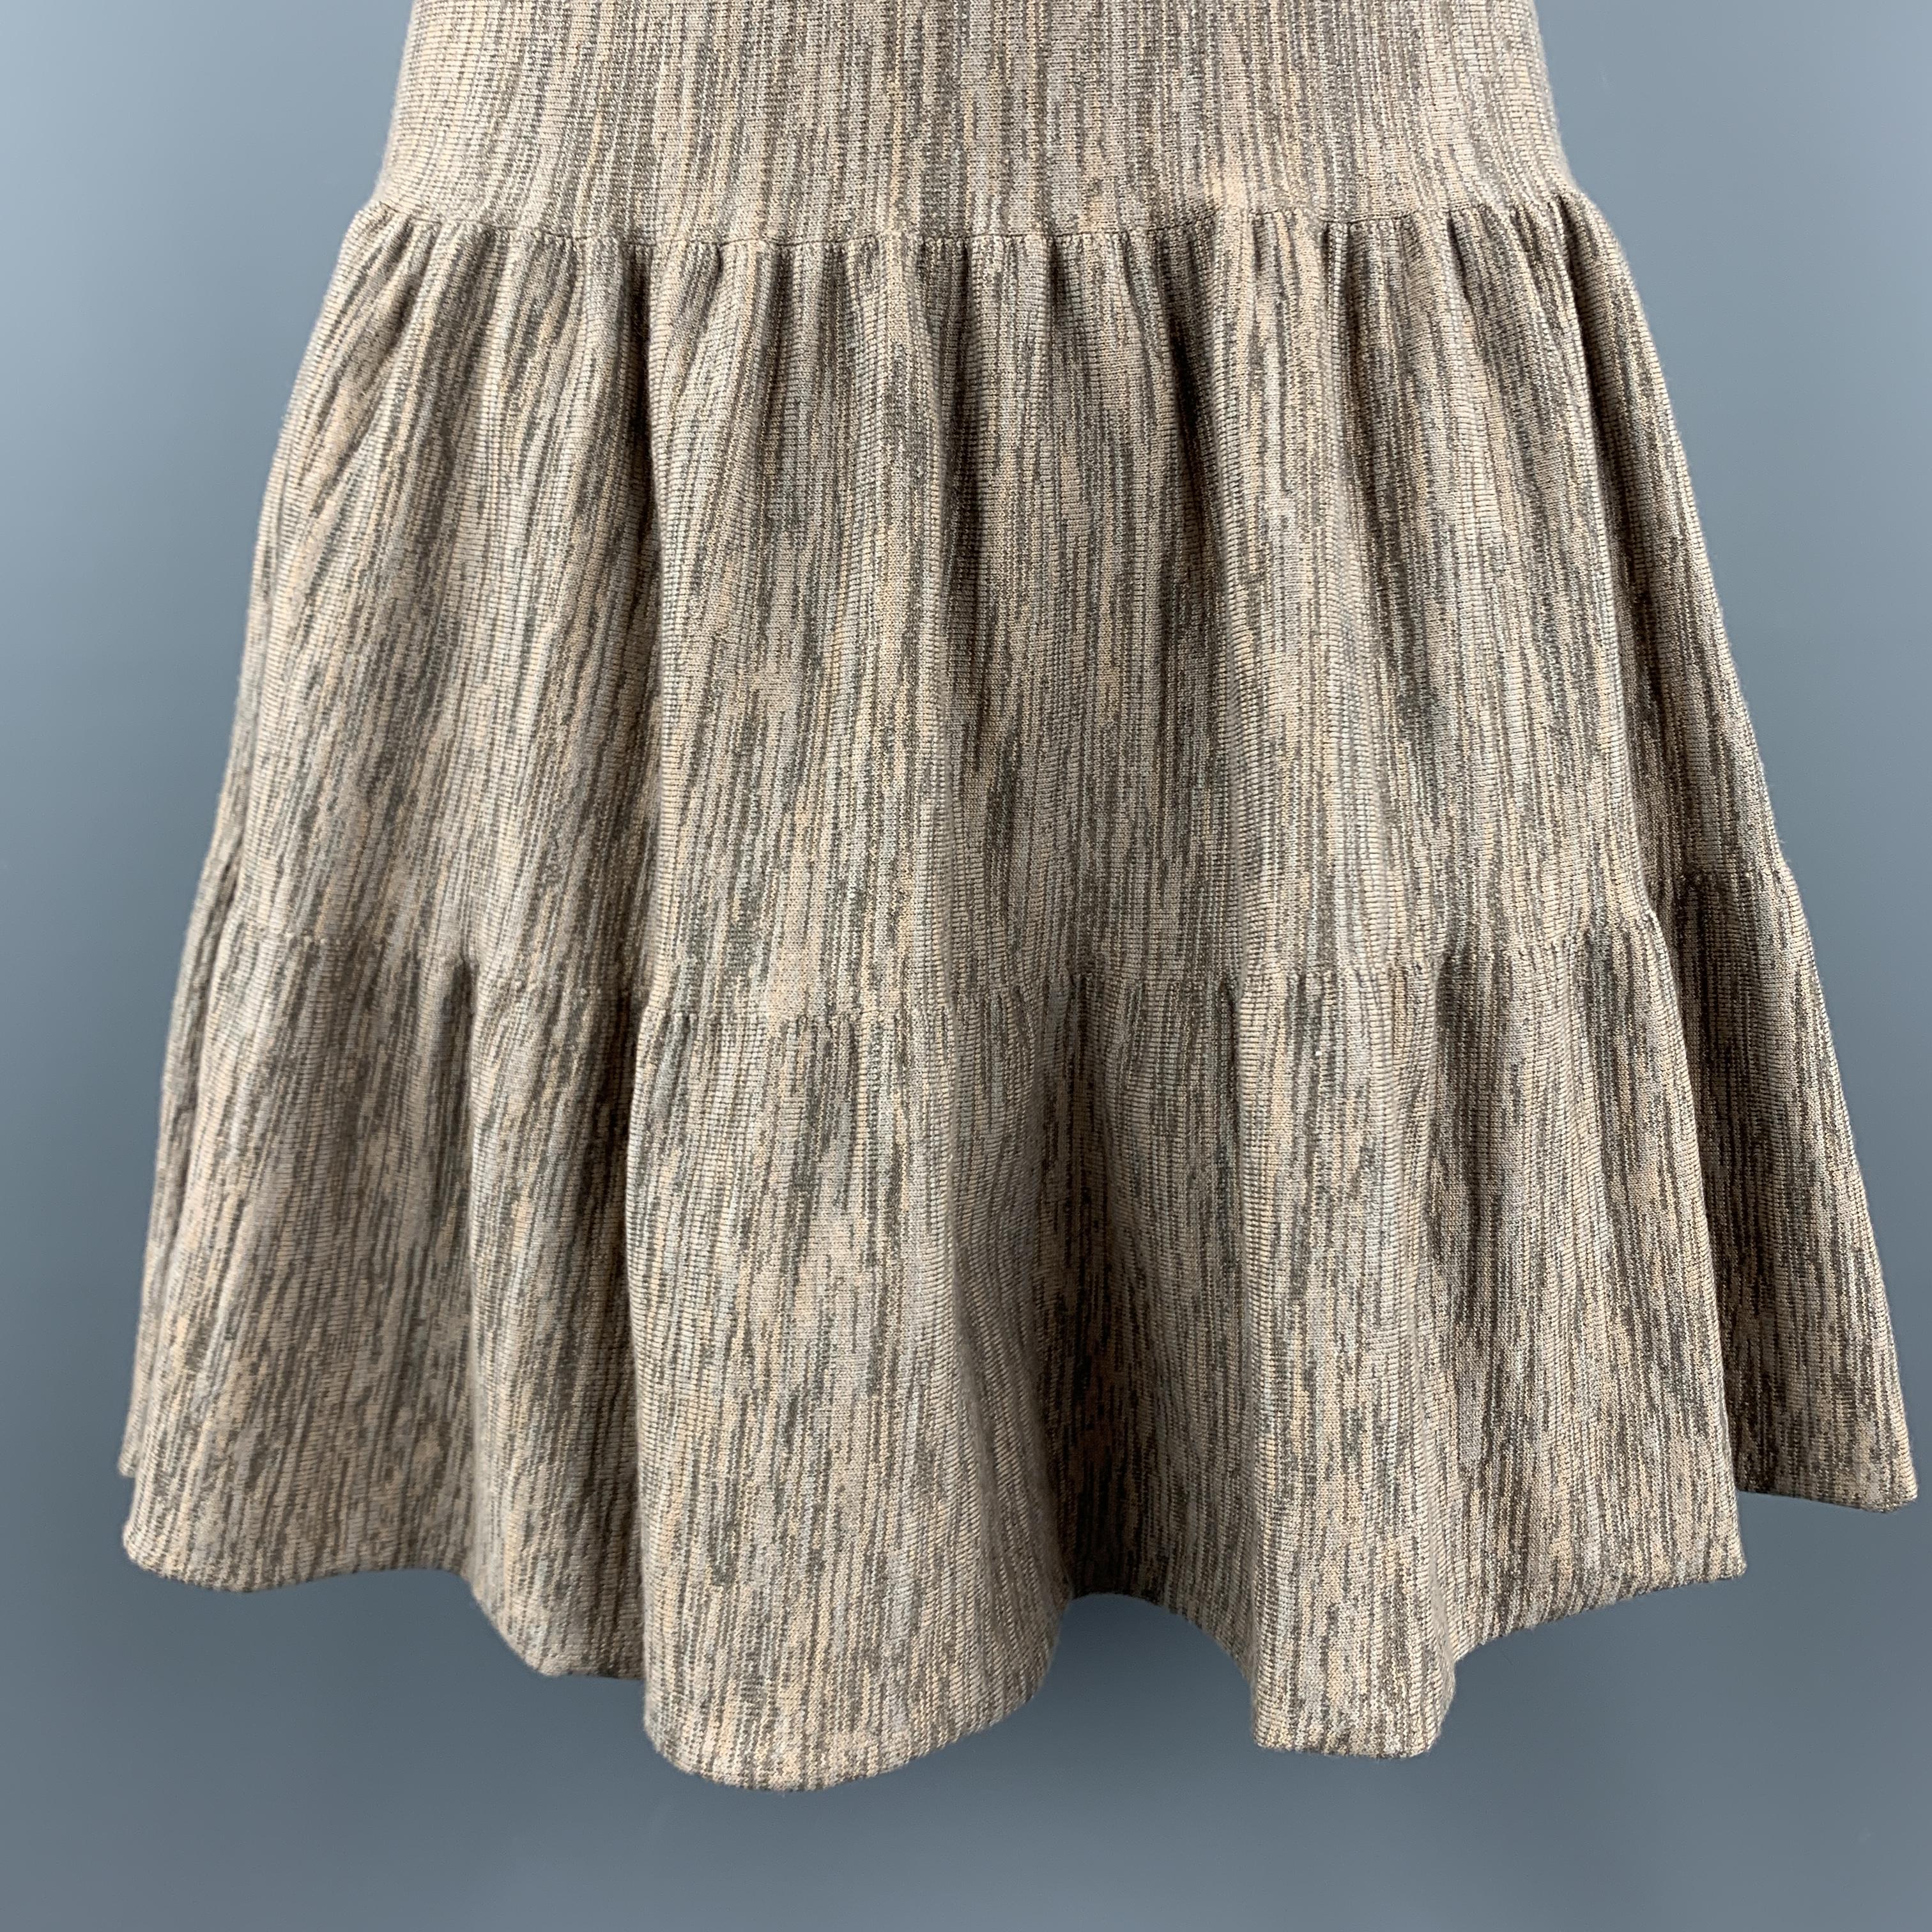 FENDI A line skirt comes in taupe and beige heathered wool knit with tiered ruffles. Made in Italy.

Excellent Pre-Owned Condition.
Marked: IT 40

Measurements:

Waist: 25 in.
Hip: 42 in.
Length: 20 in.